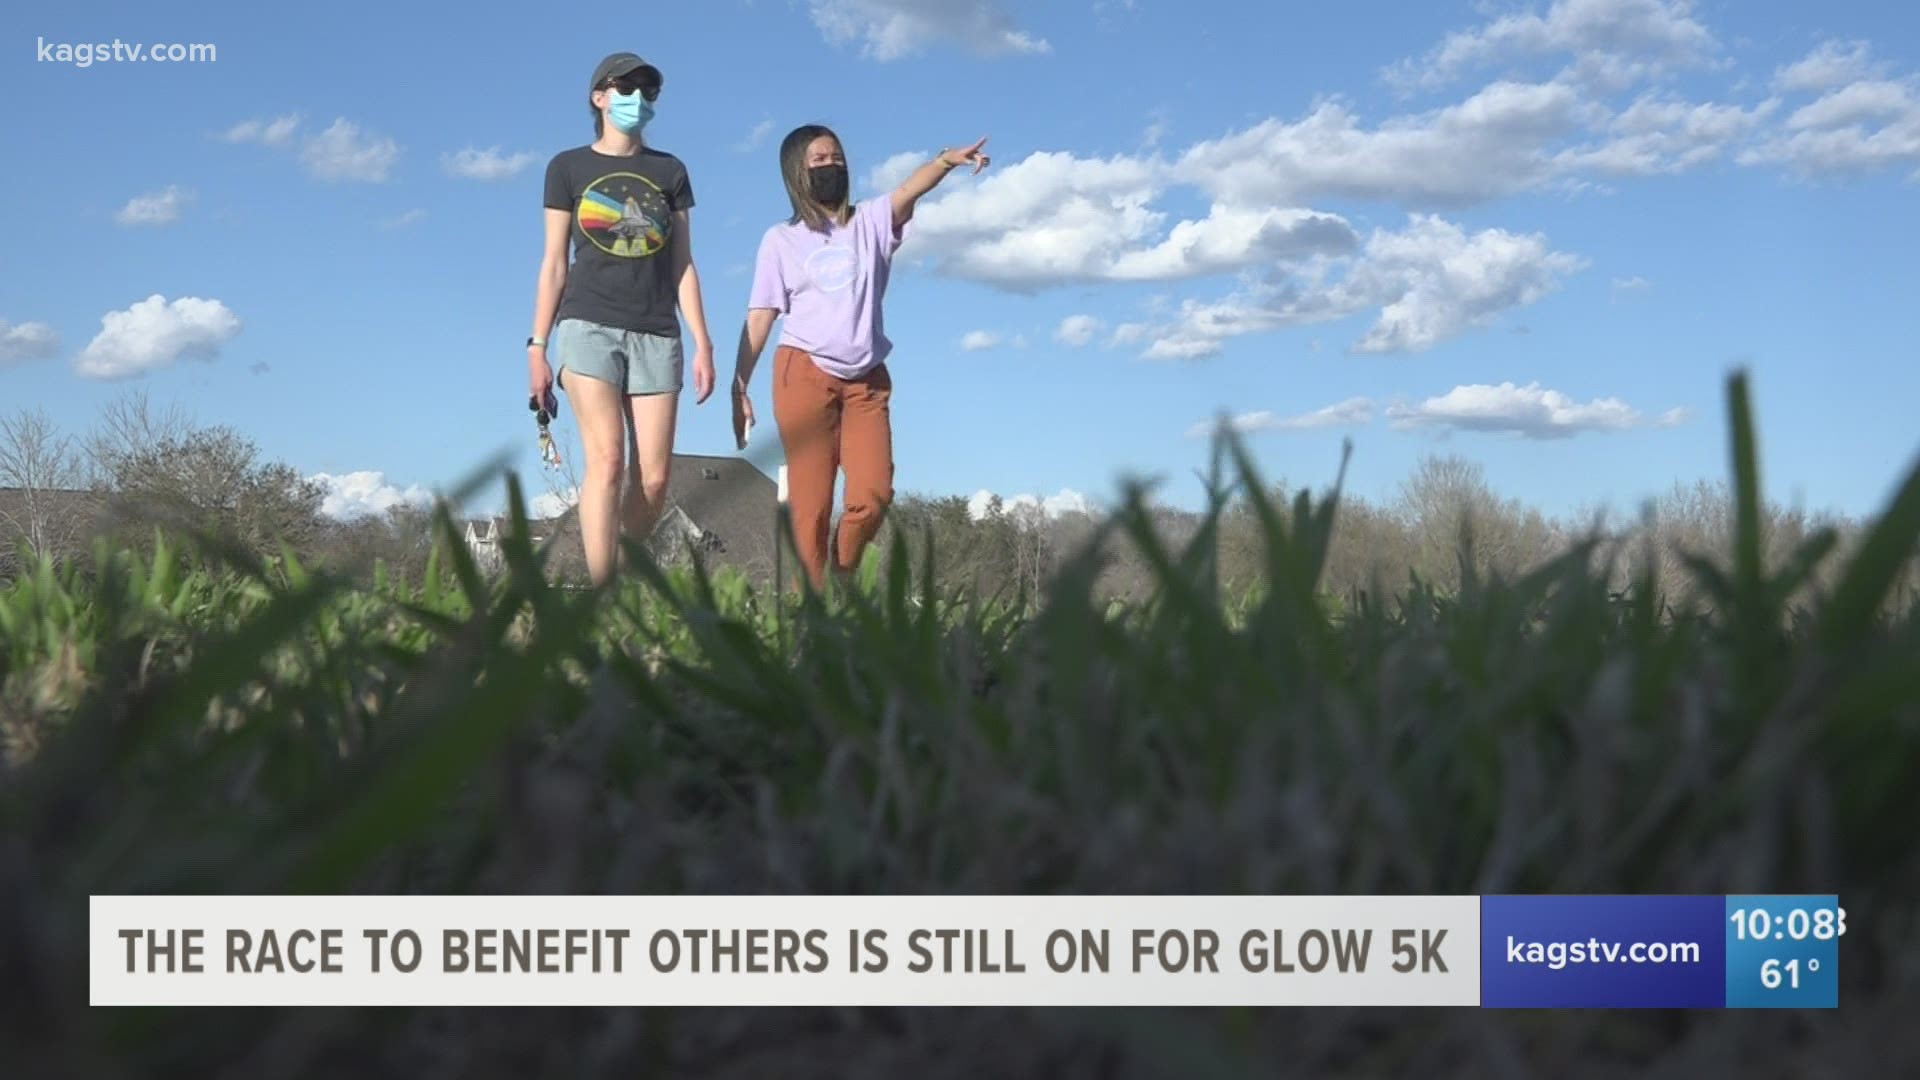 Aggie Men's Club and Maggies are putting on their annual GLOW 5K this weekend. Proceeds will benefit Big Brothers, Big Sisters and Kairos in Guatemala.